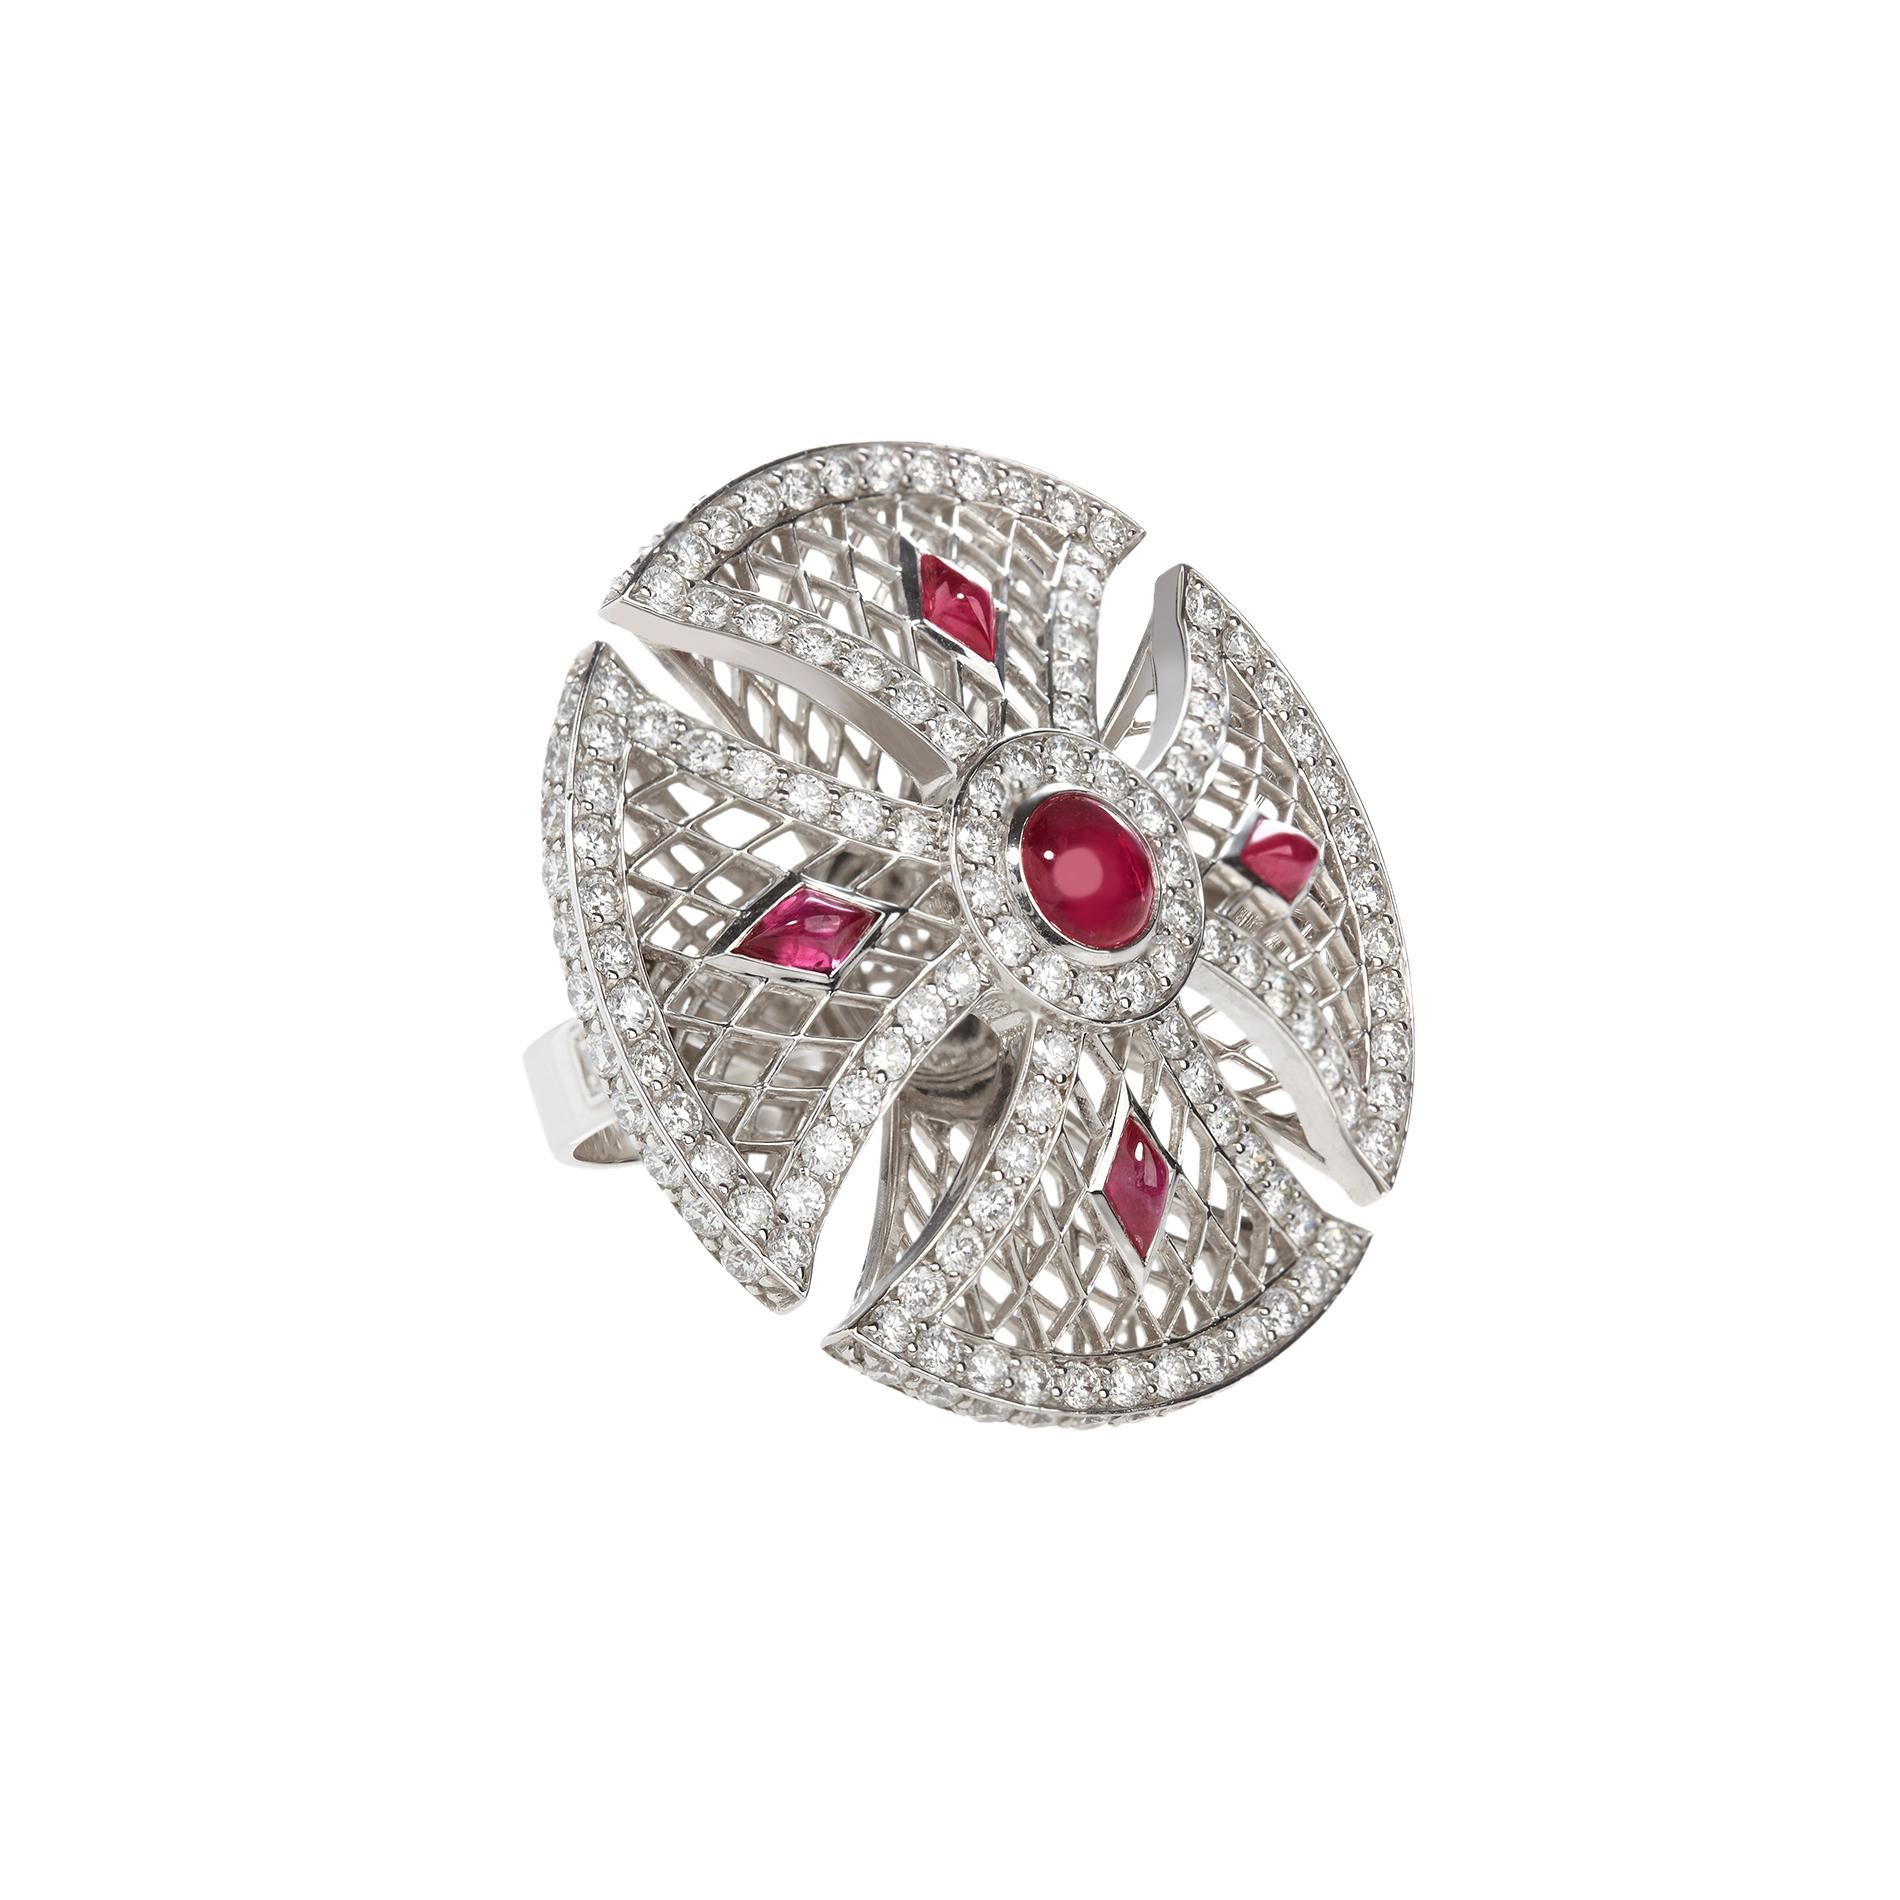 The Sybarite Heritage Collection draws on centuries of tradition and sovereign imagery. Crafted from the finest white gold, this piece is set alight with diamonds and blazing rubies.

Steeped in heritage, this piece turns to the Maltese Cross for